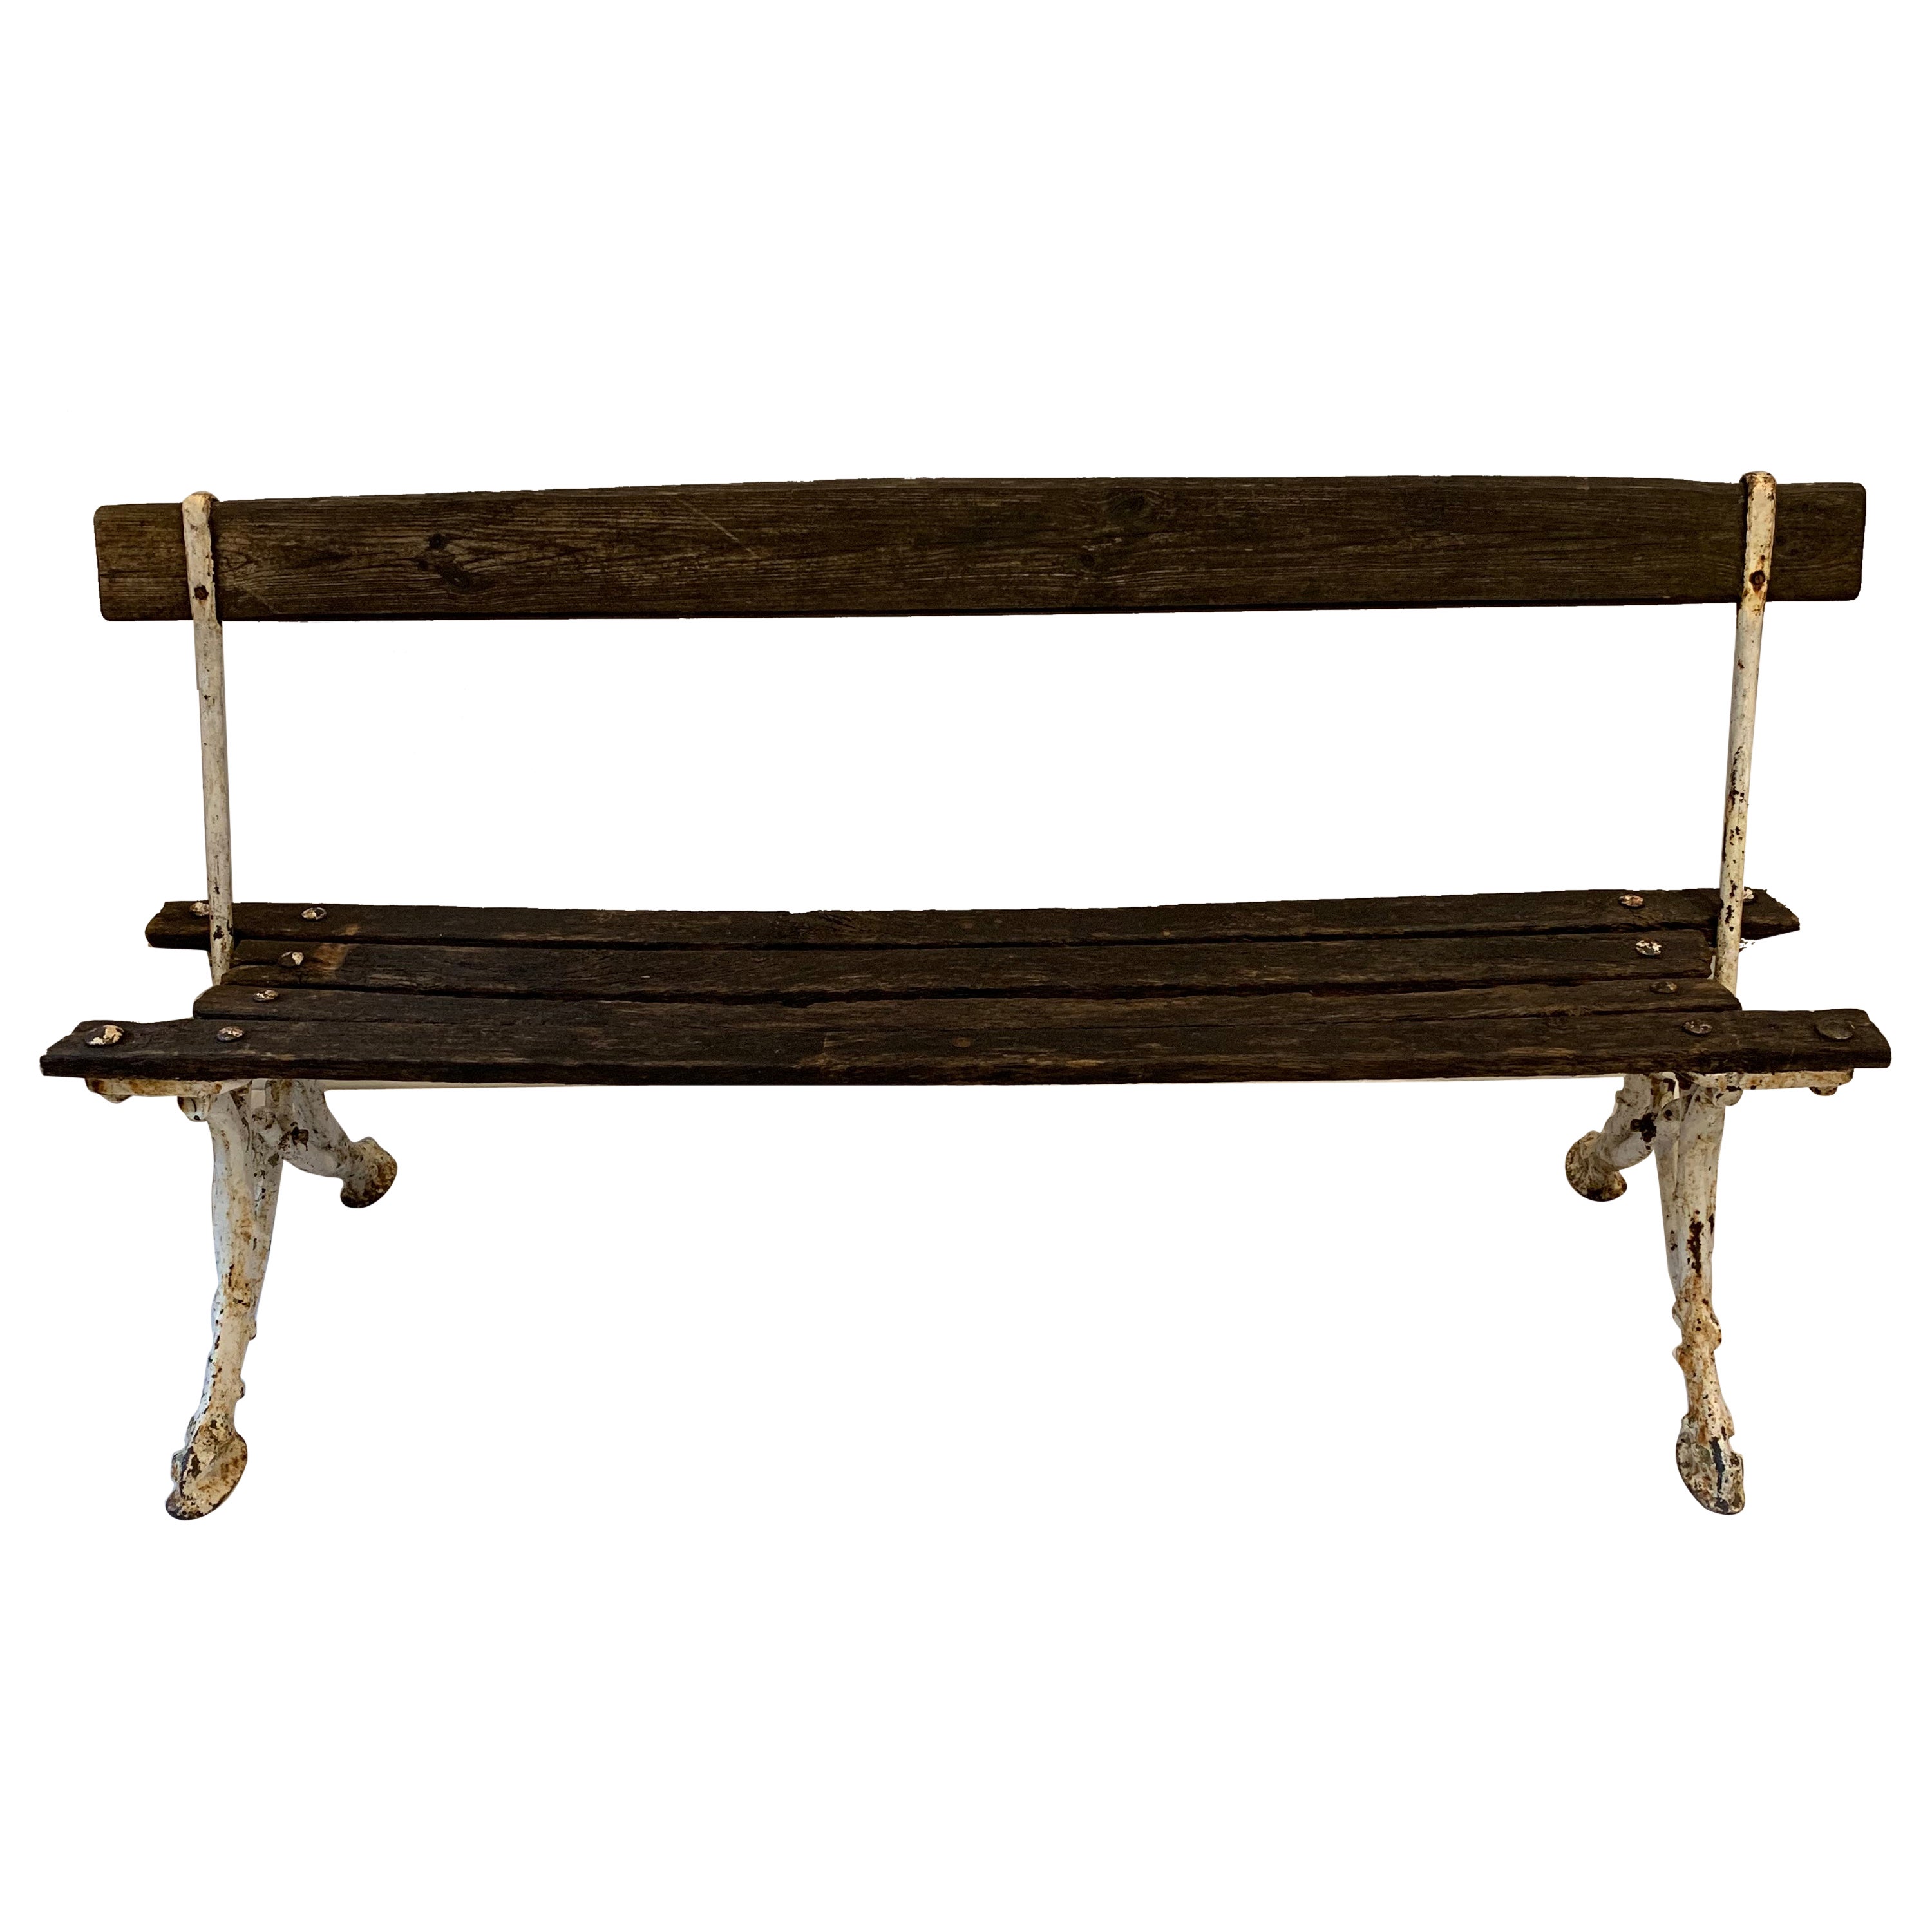 Circa 1900s French Faux Bois Rustic Painted Cast Iron Garden Bench 